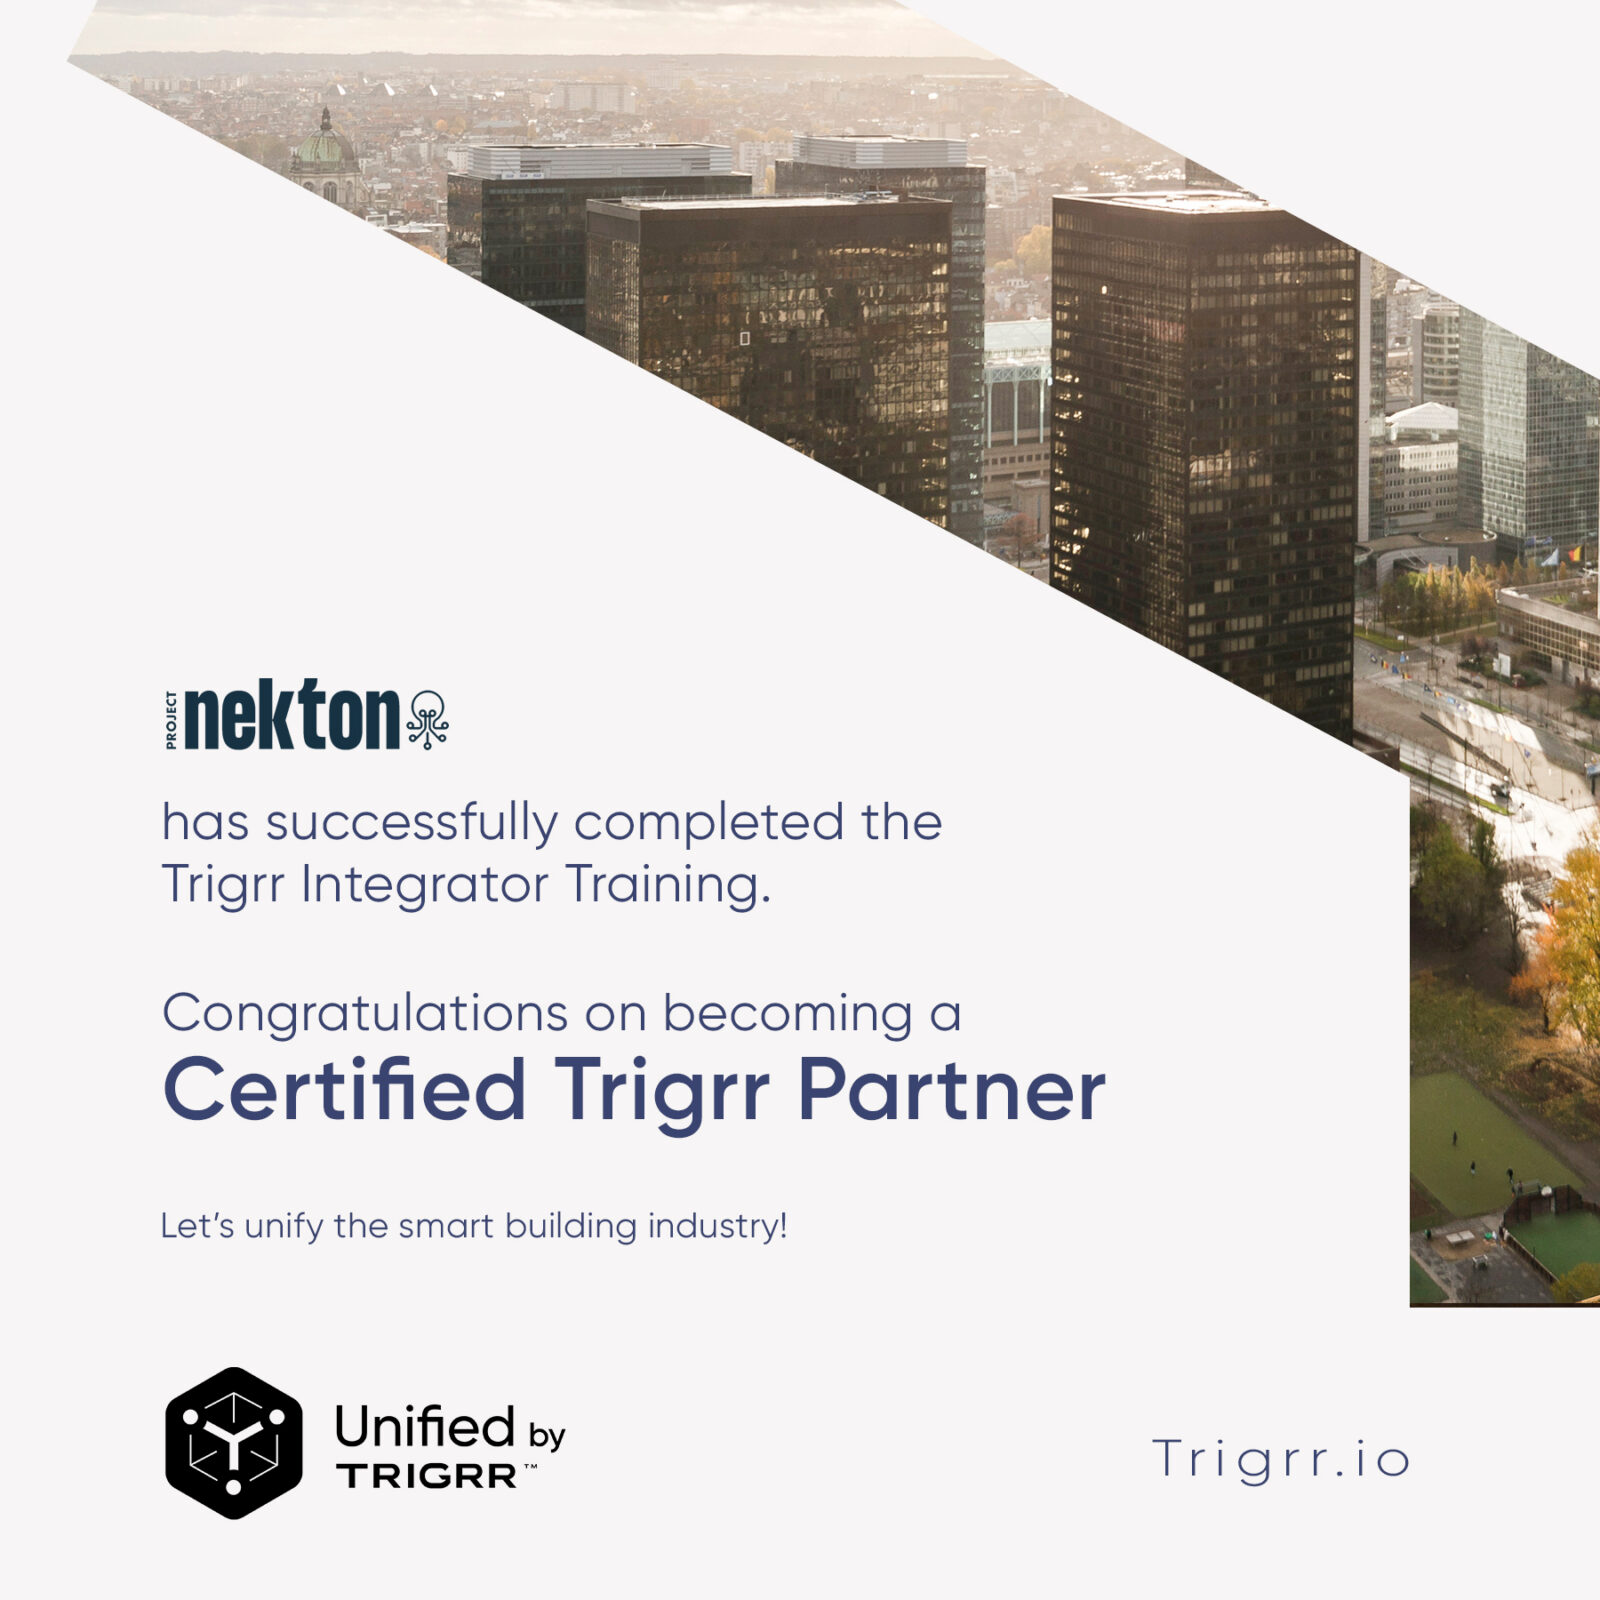 Project Nekton is a certified integrator of the Building Operating System Trigrr